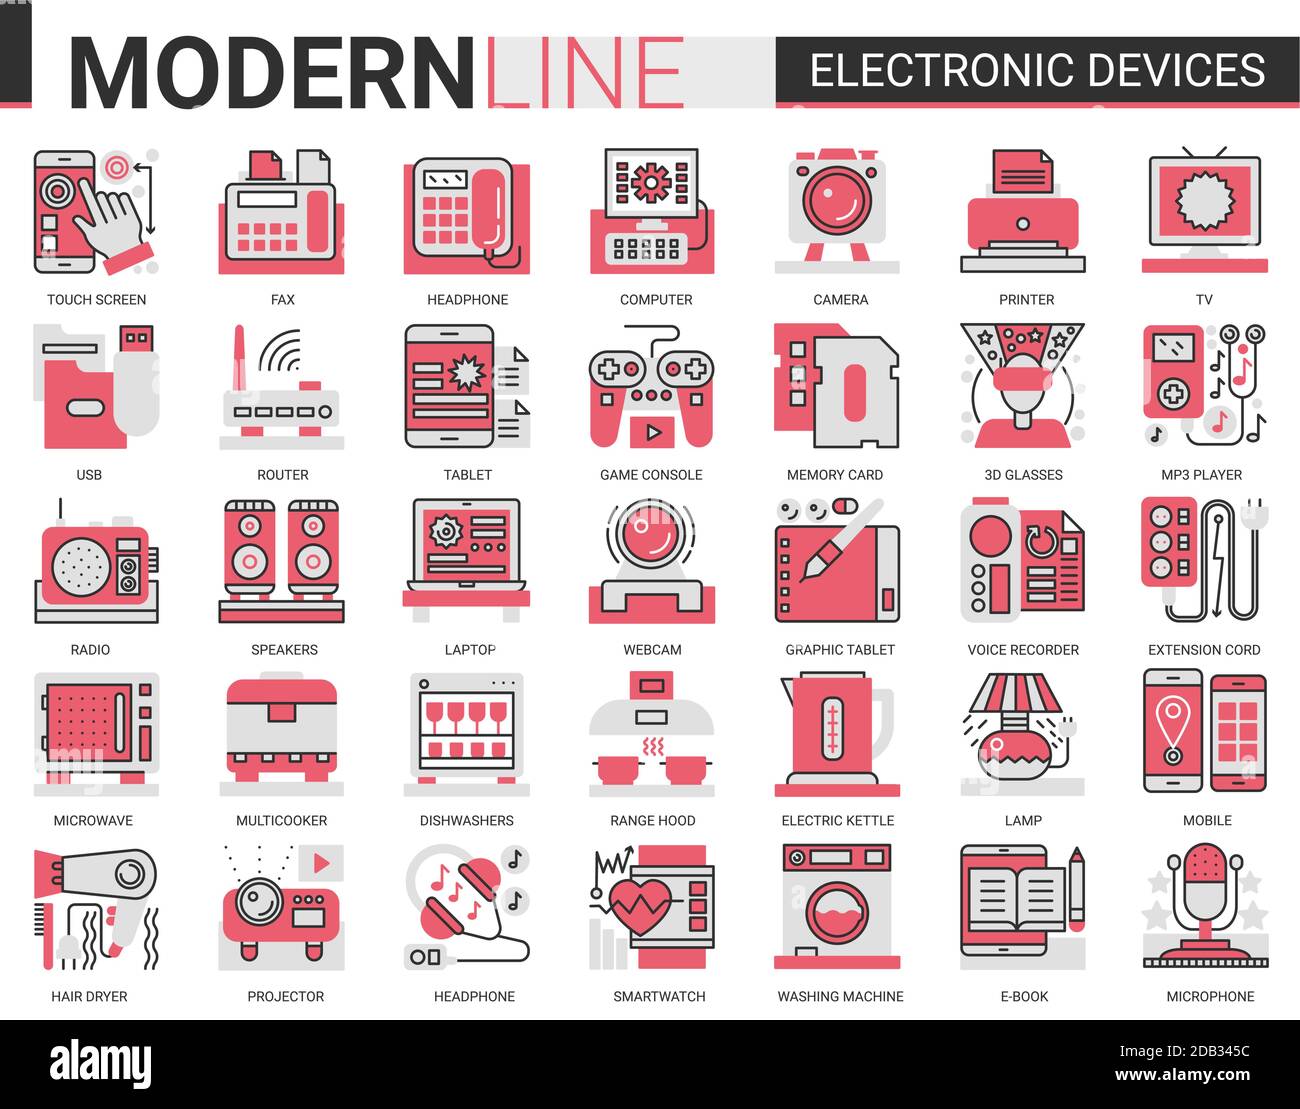 https://c8.alamy.com/comp/2DB345C/electronic-devices-complex-concept-flat-line-icon-vector-illustration-set-computer-accessories-and-kitchen-appliances-collection-of-outline-electronically-symbols-for-gadget-or-kitchenware-store-2DB345C.jpg